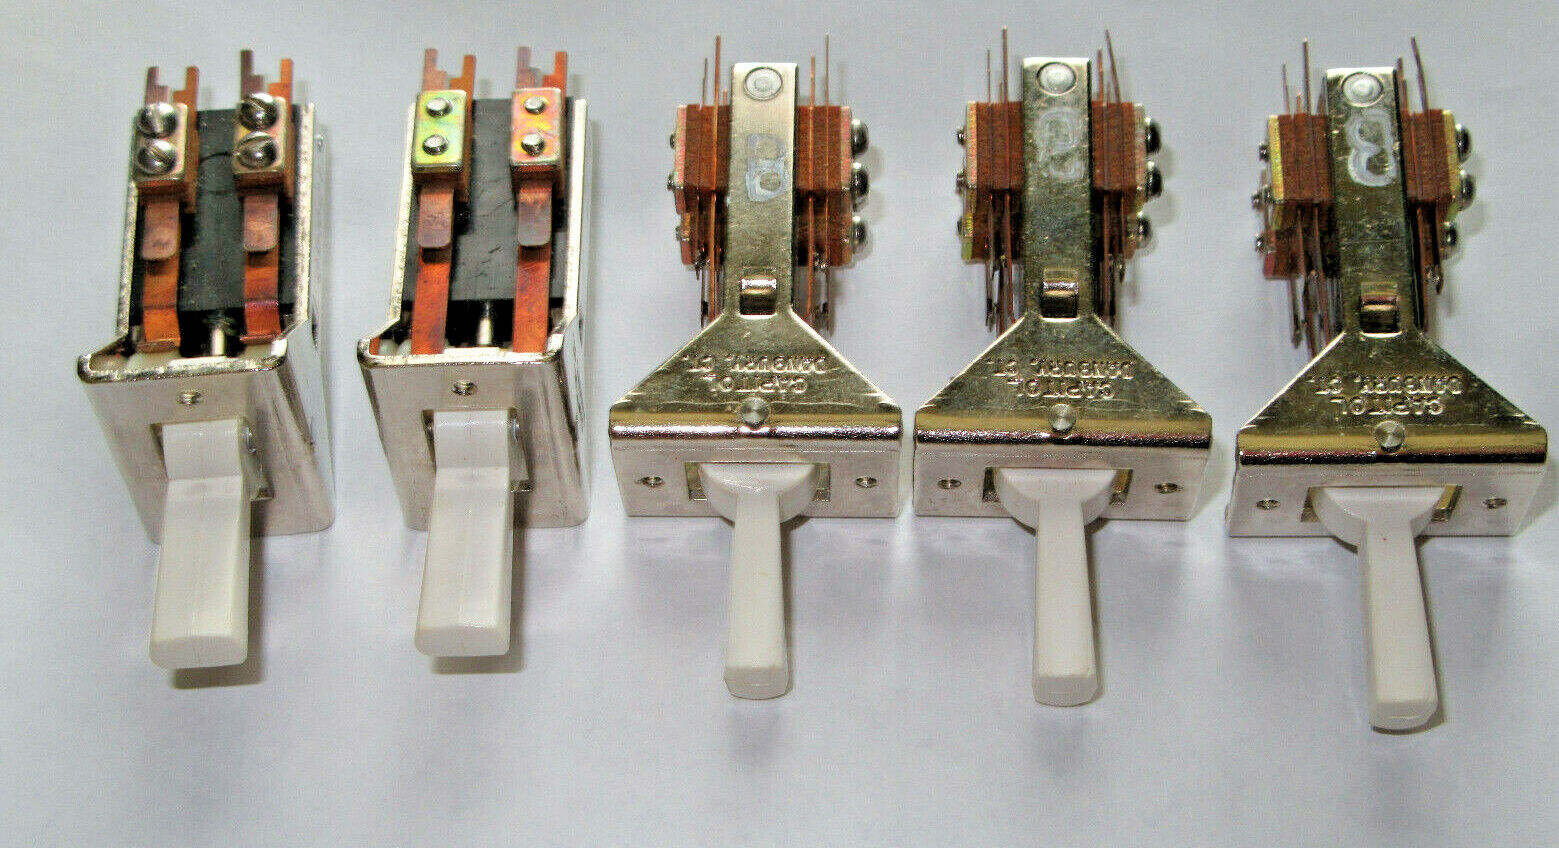 5x Vintage Momentary On/Toggle On Switch Part for Electronics or Ham Radio